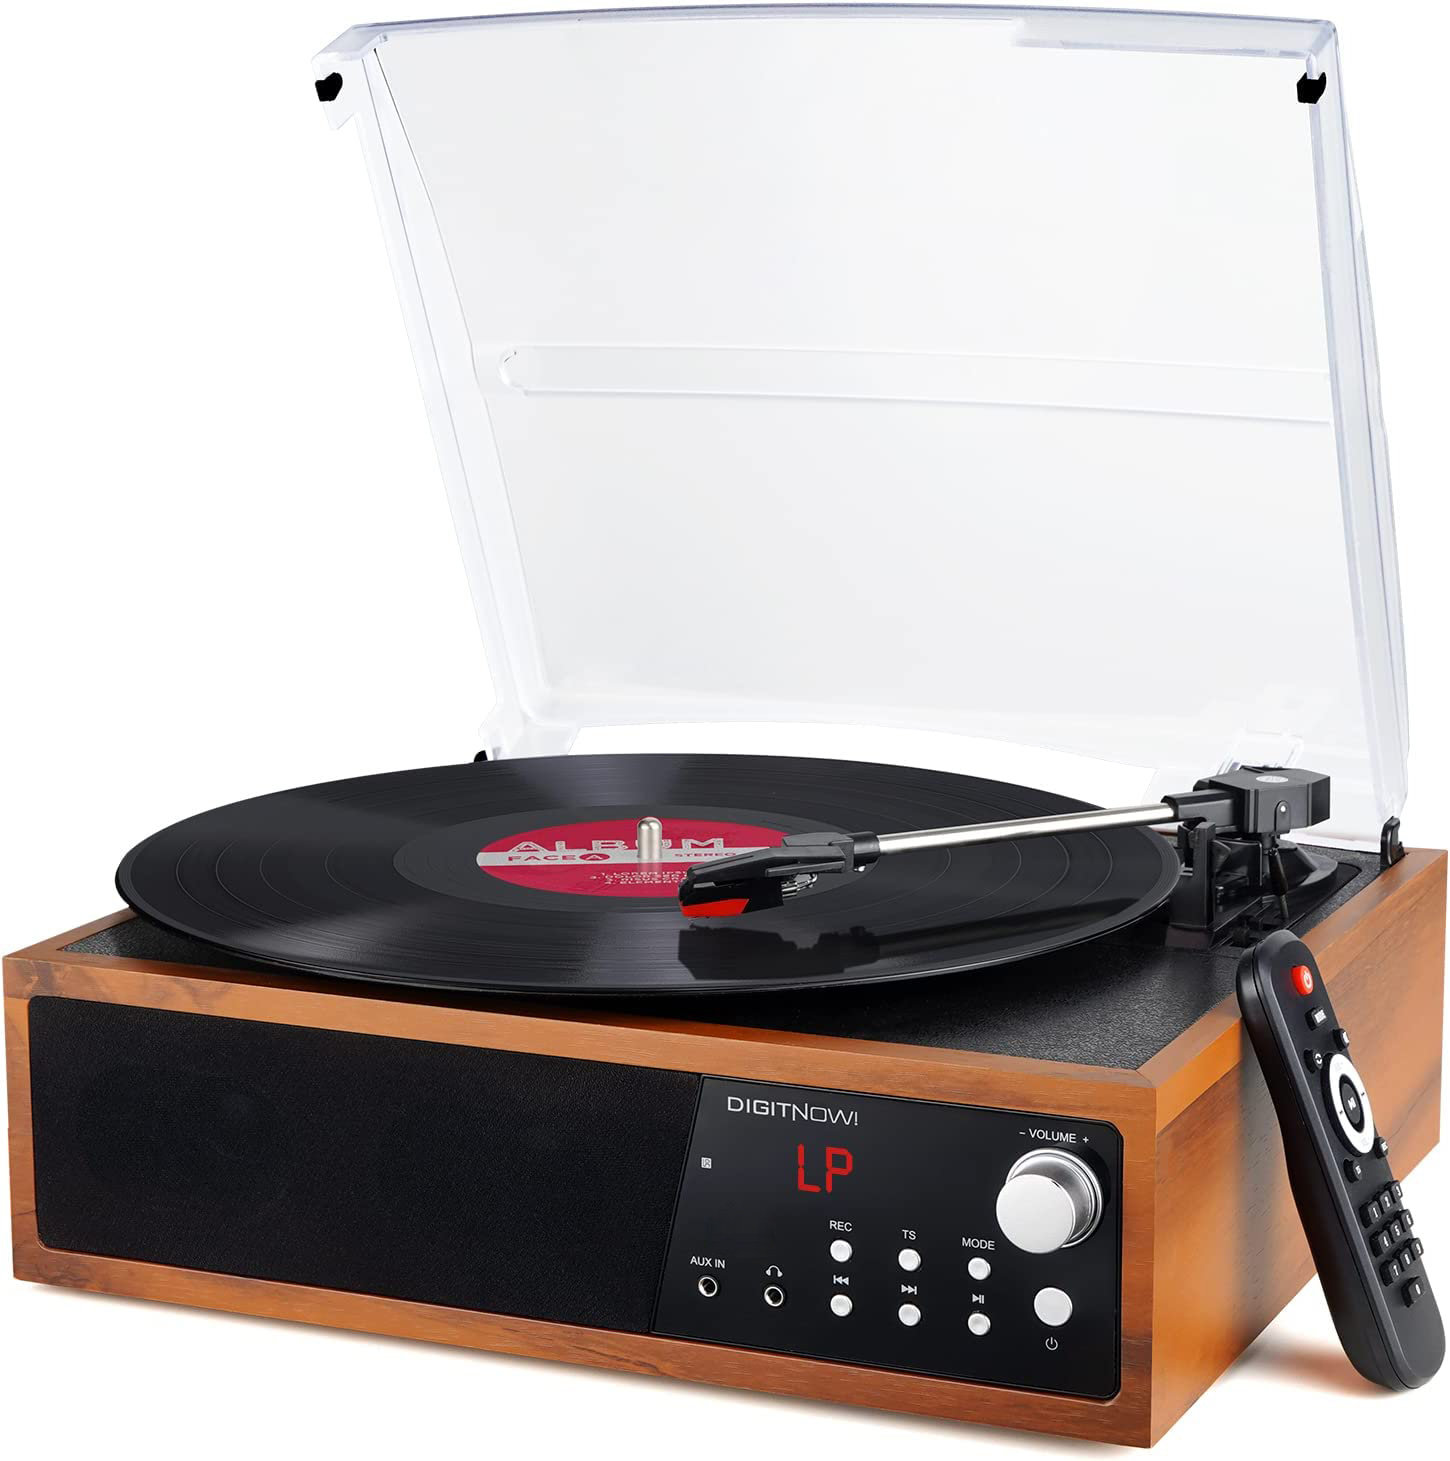 DIGITNOW Bluetooth Record Player, 3-Speed Turntable with Stereo